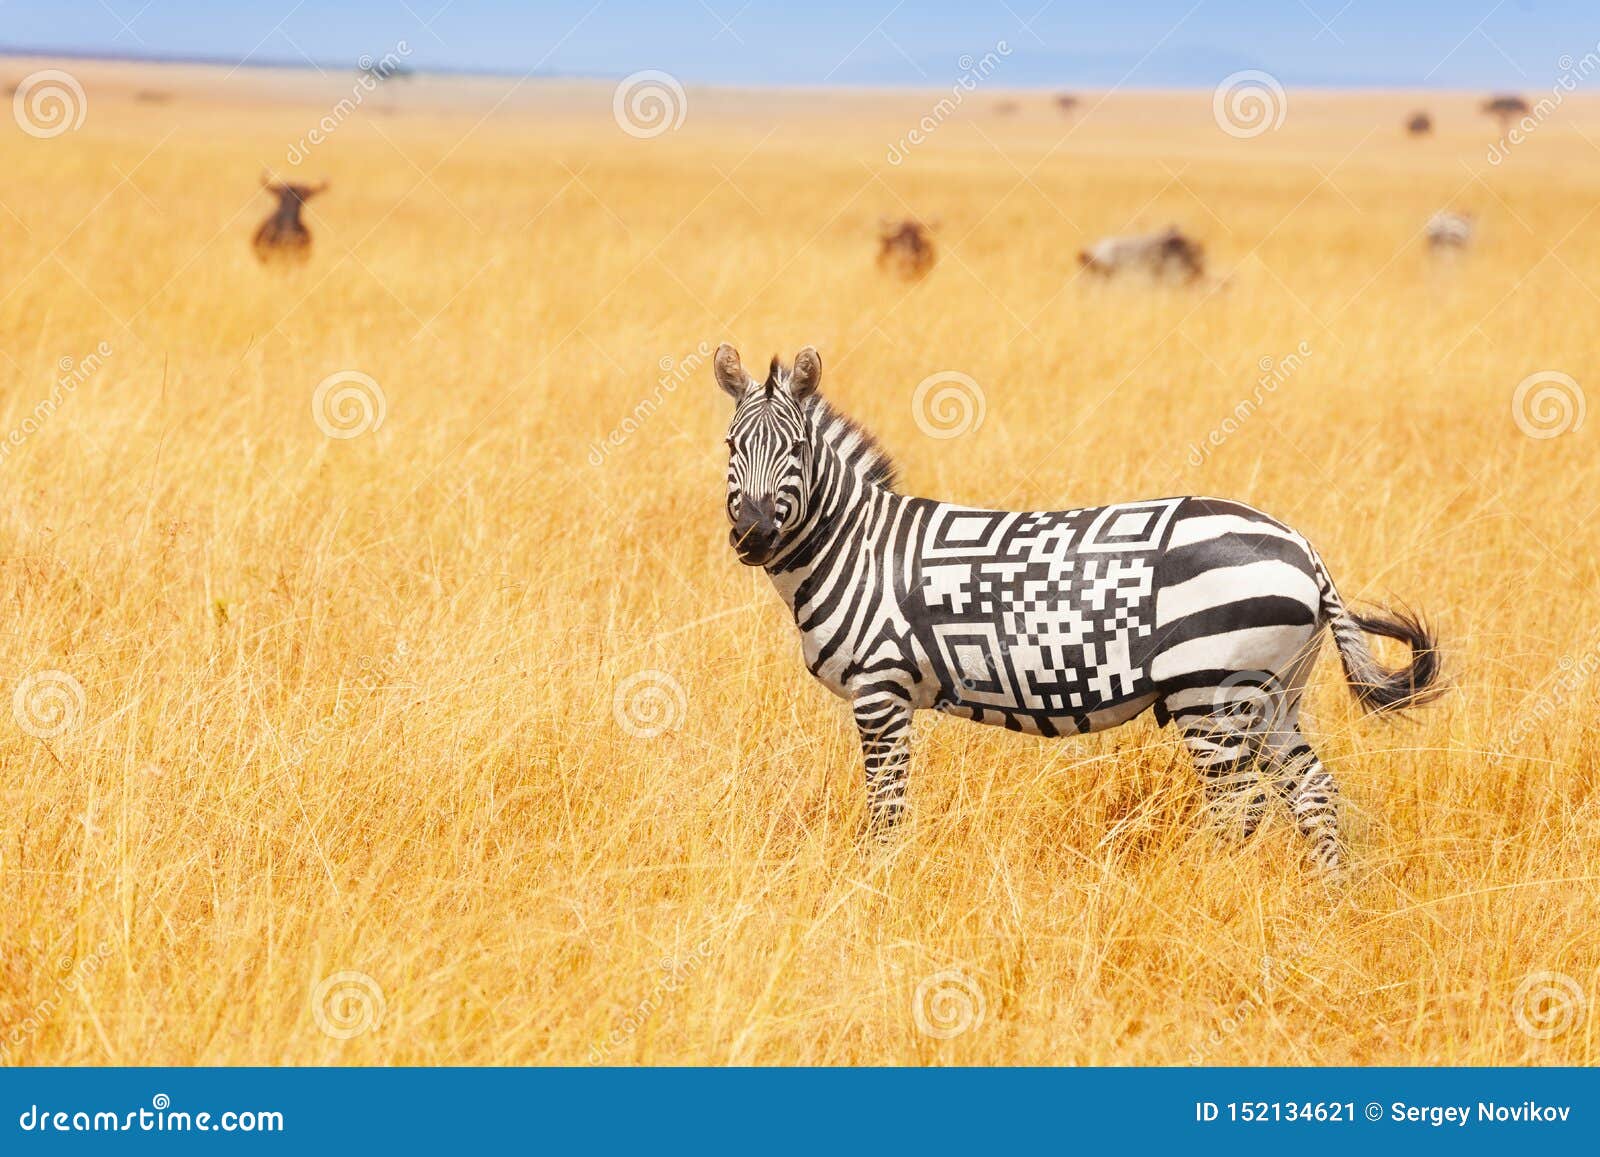 Zebra with QR code on the back
                concept in field